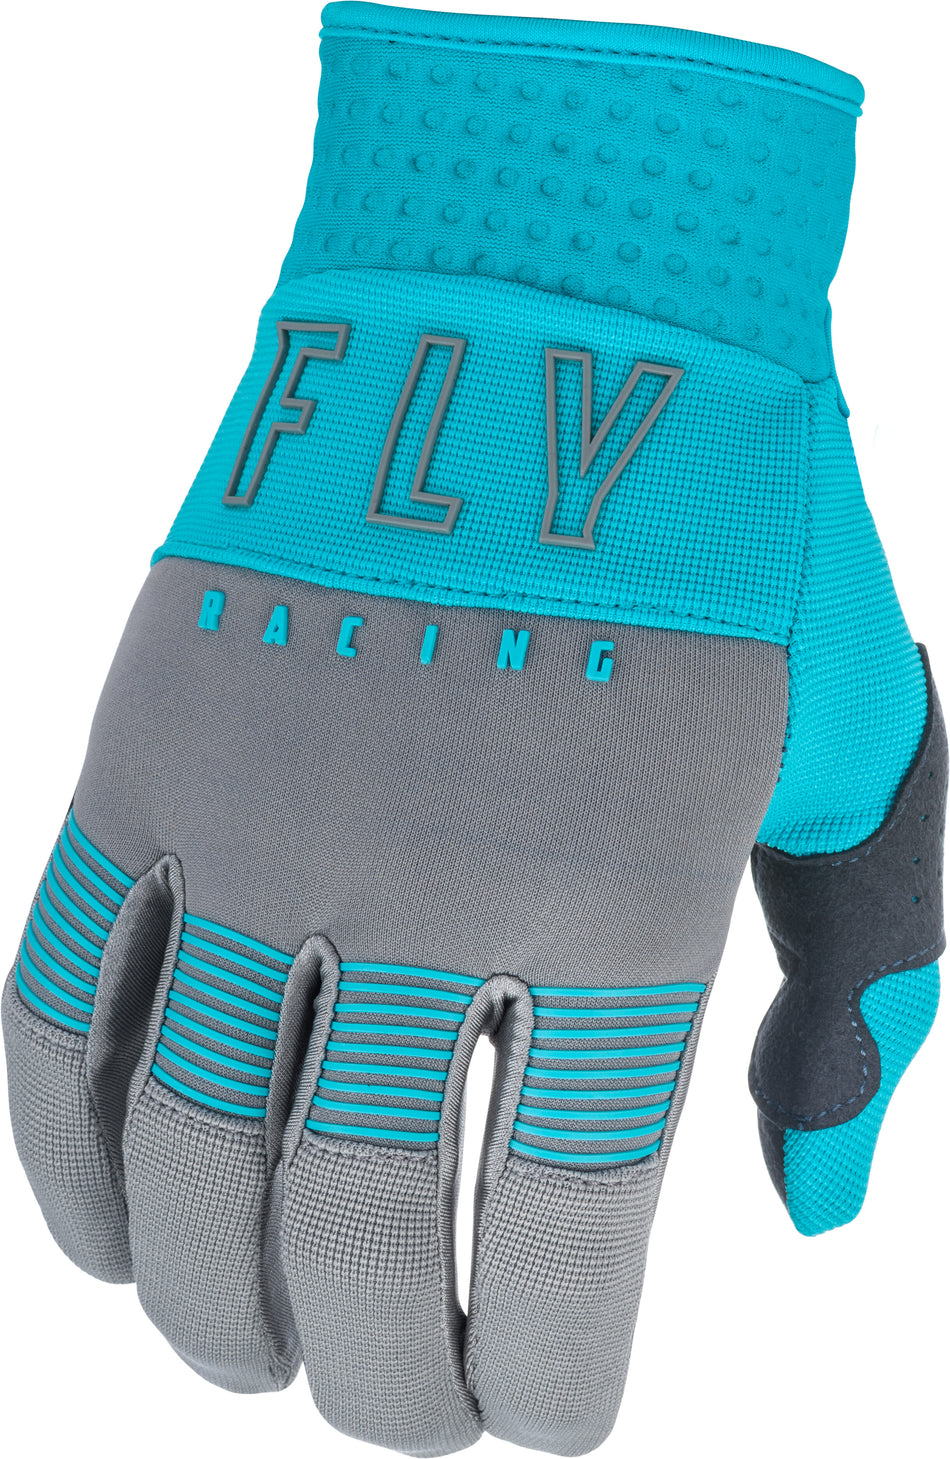 FLY RACING Youth F-16 Gloves Grey/Blue Sz 05 374-81605